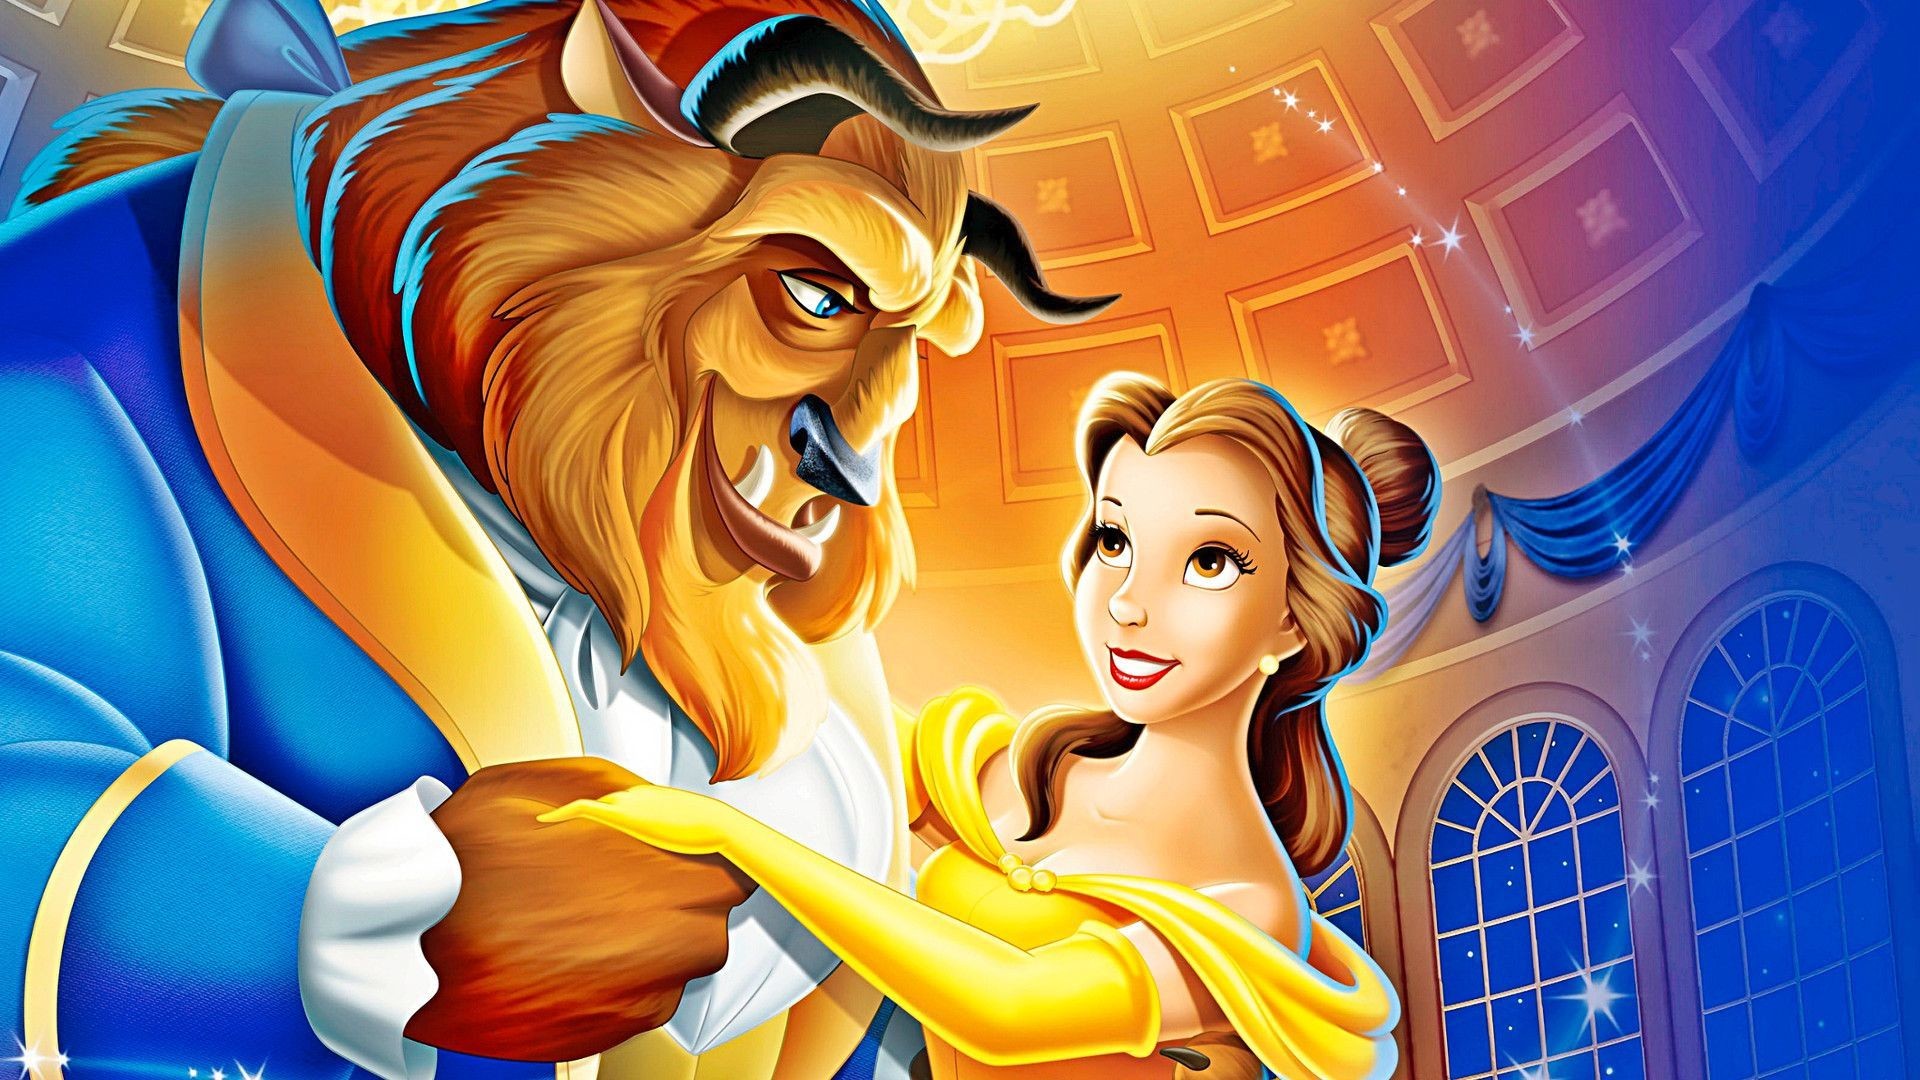 Beauty and the Beast Wallpaper (79+ images)